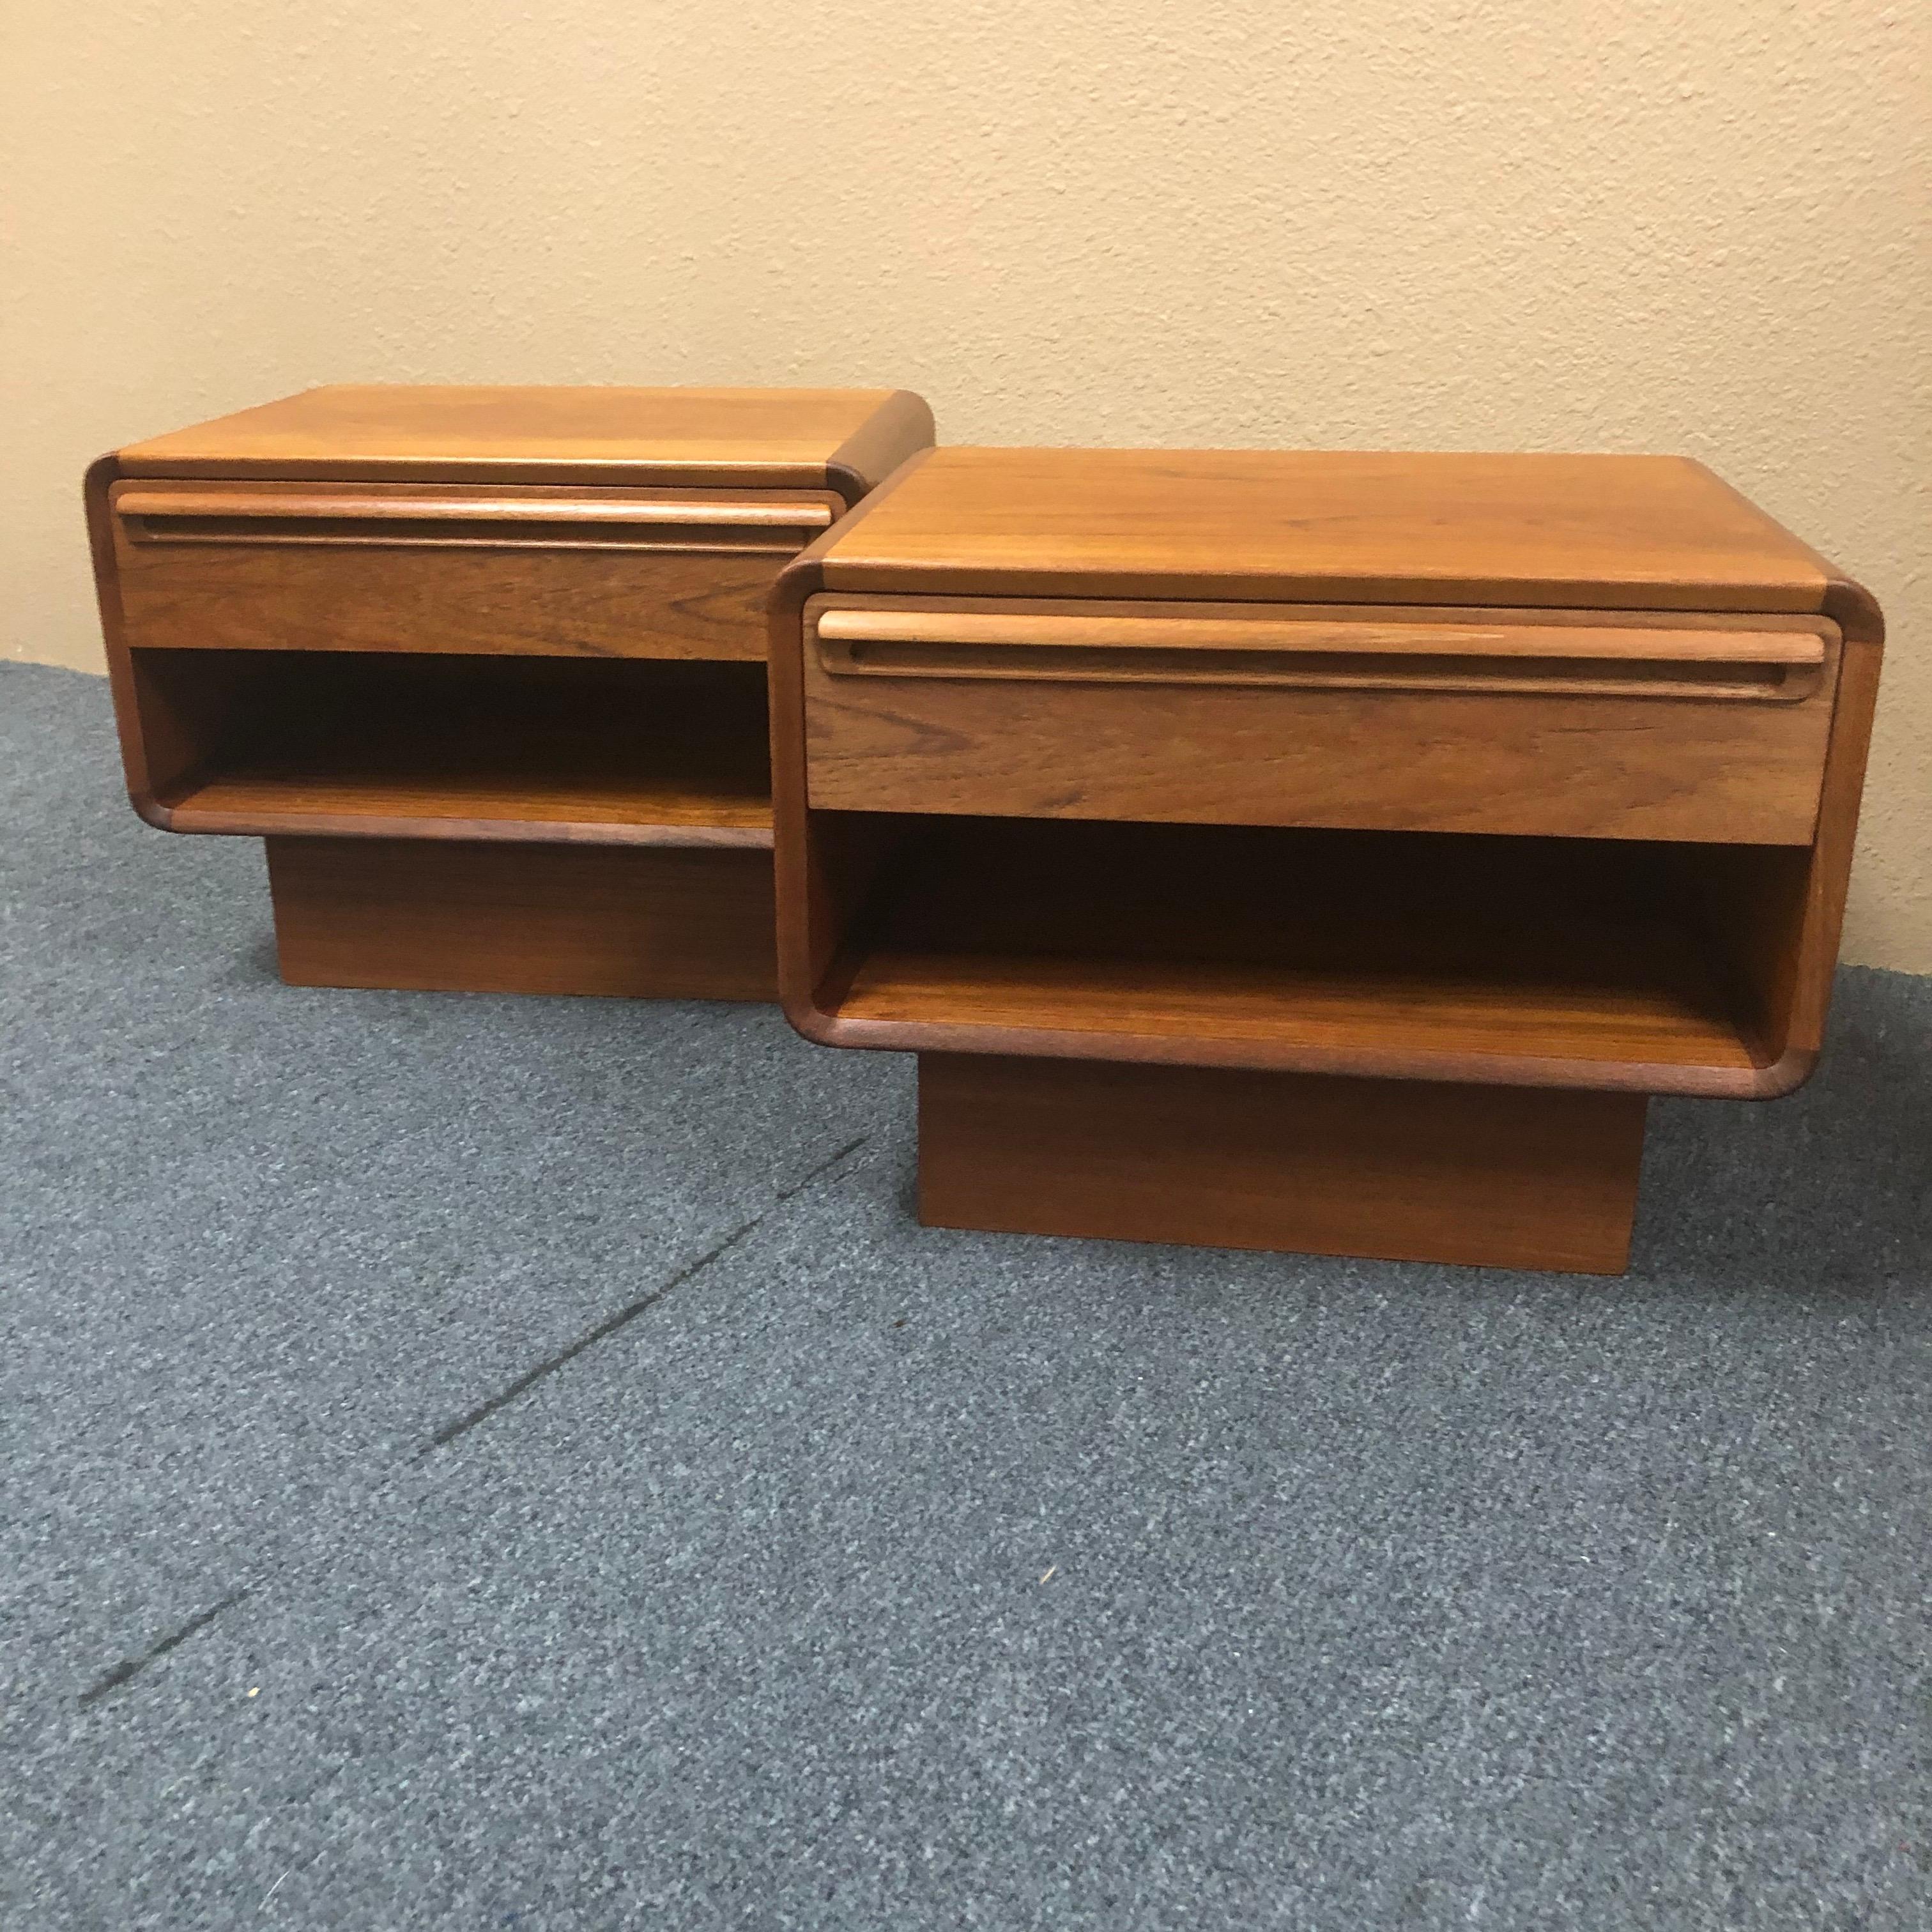 Sleek pair of Danish modern low profile one-drawer teak nightstands, circa 1960s. The pair has been professionally refinished and measure 20.5